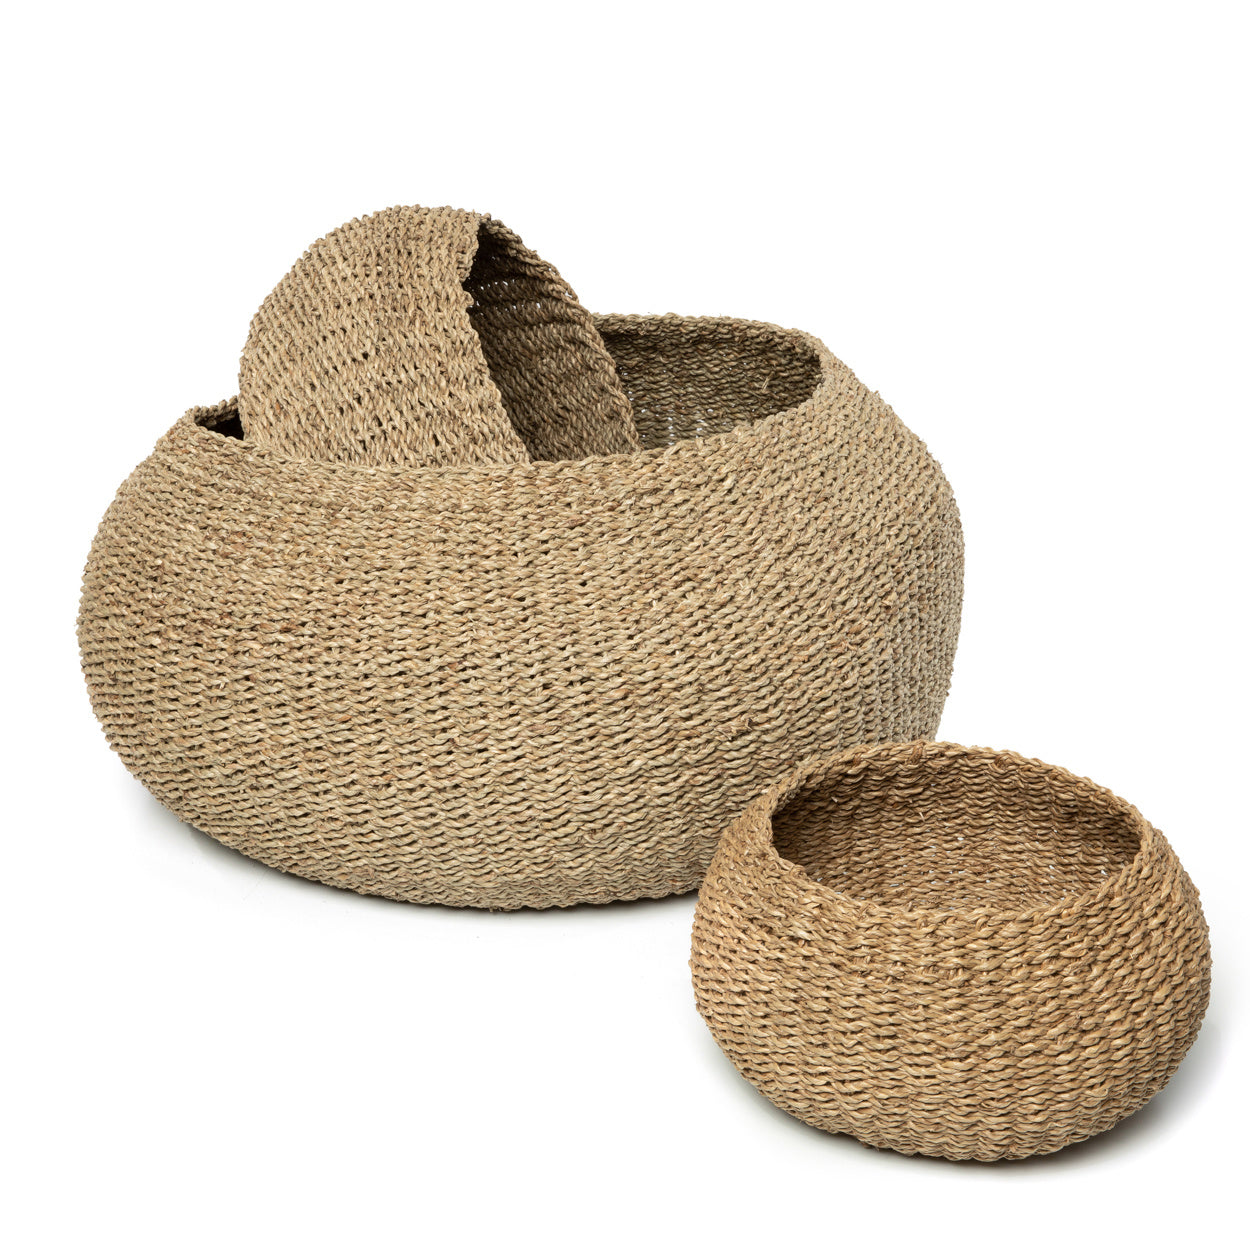 THE HO COC Baskets Set of 3 half-folded front view